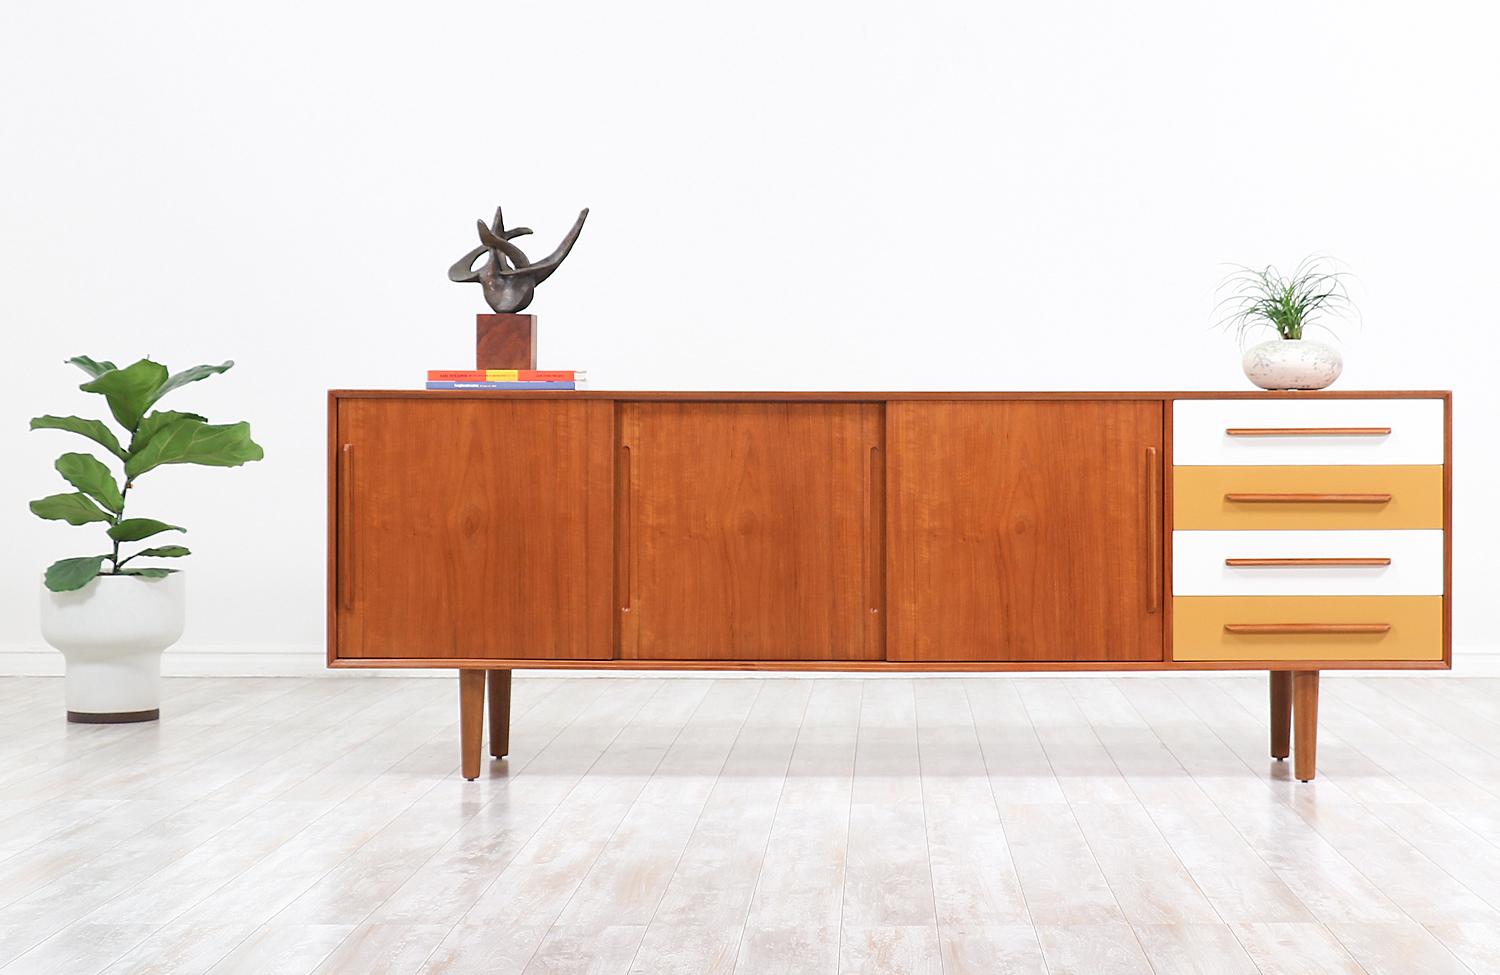 Minimalist modern lacquered credenza designed and manufactured in Denmark circa 1960s. This large Danish Modern credenza features a sturdy teak wood case that sits on four low profile tapered legs showcasing remarkable craftsmanship while ensuring